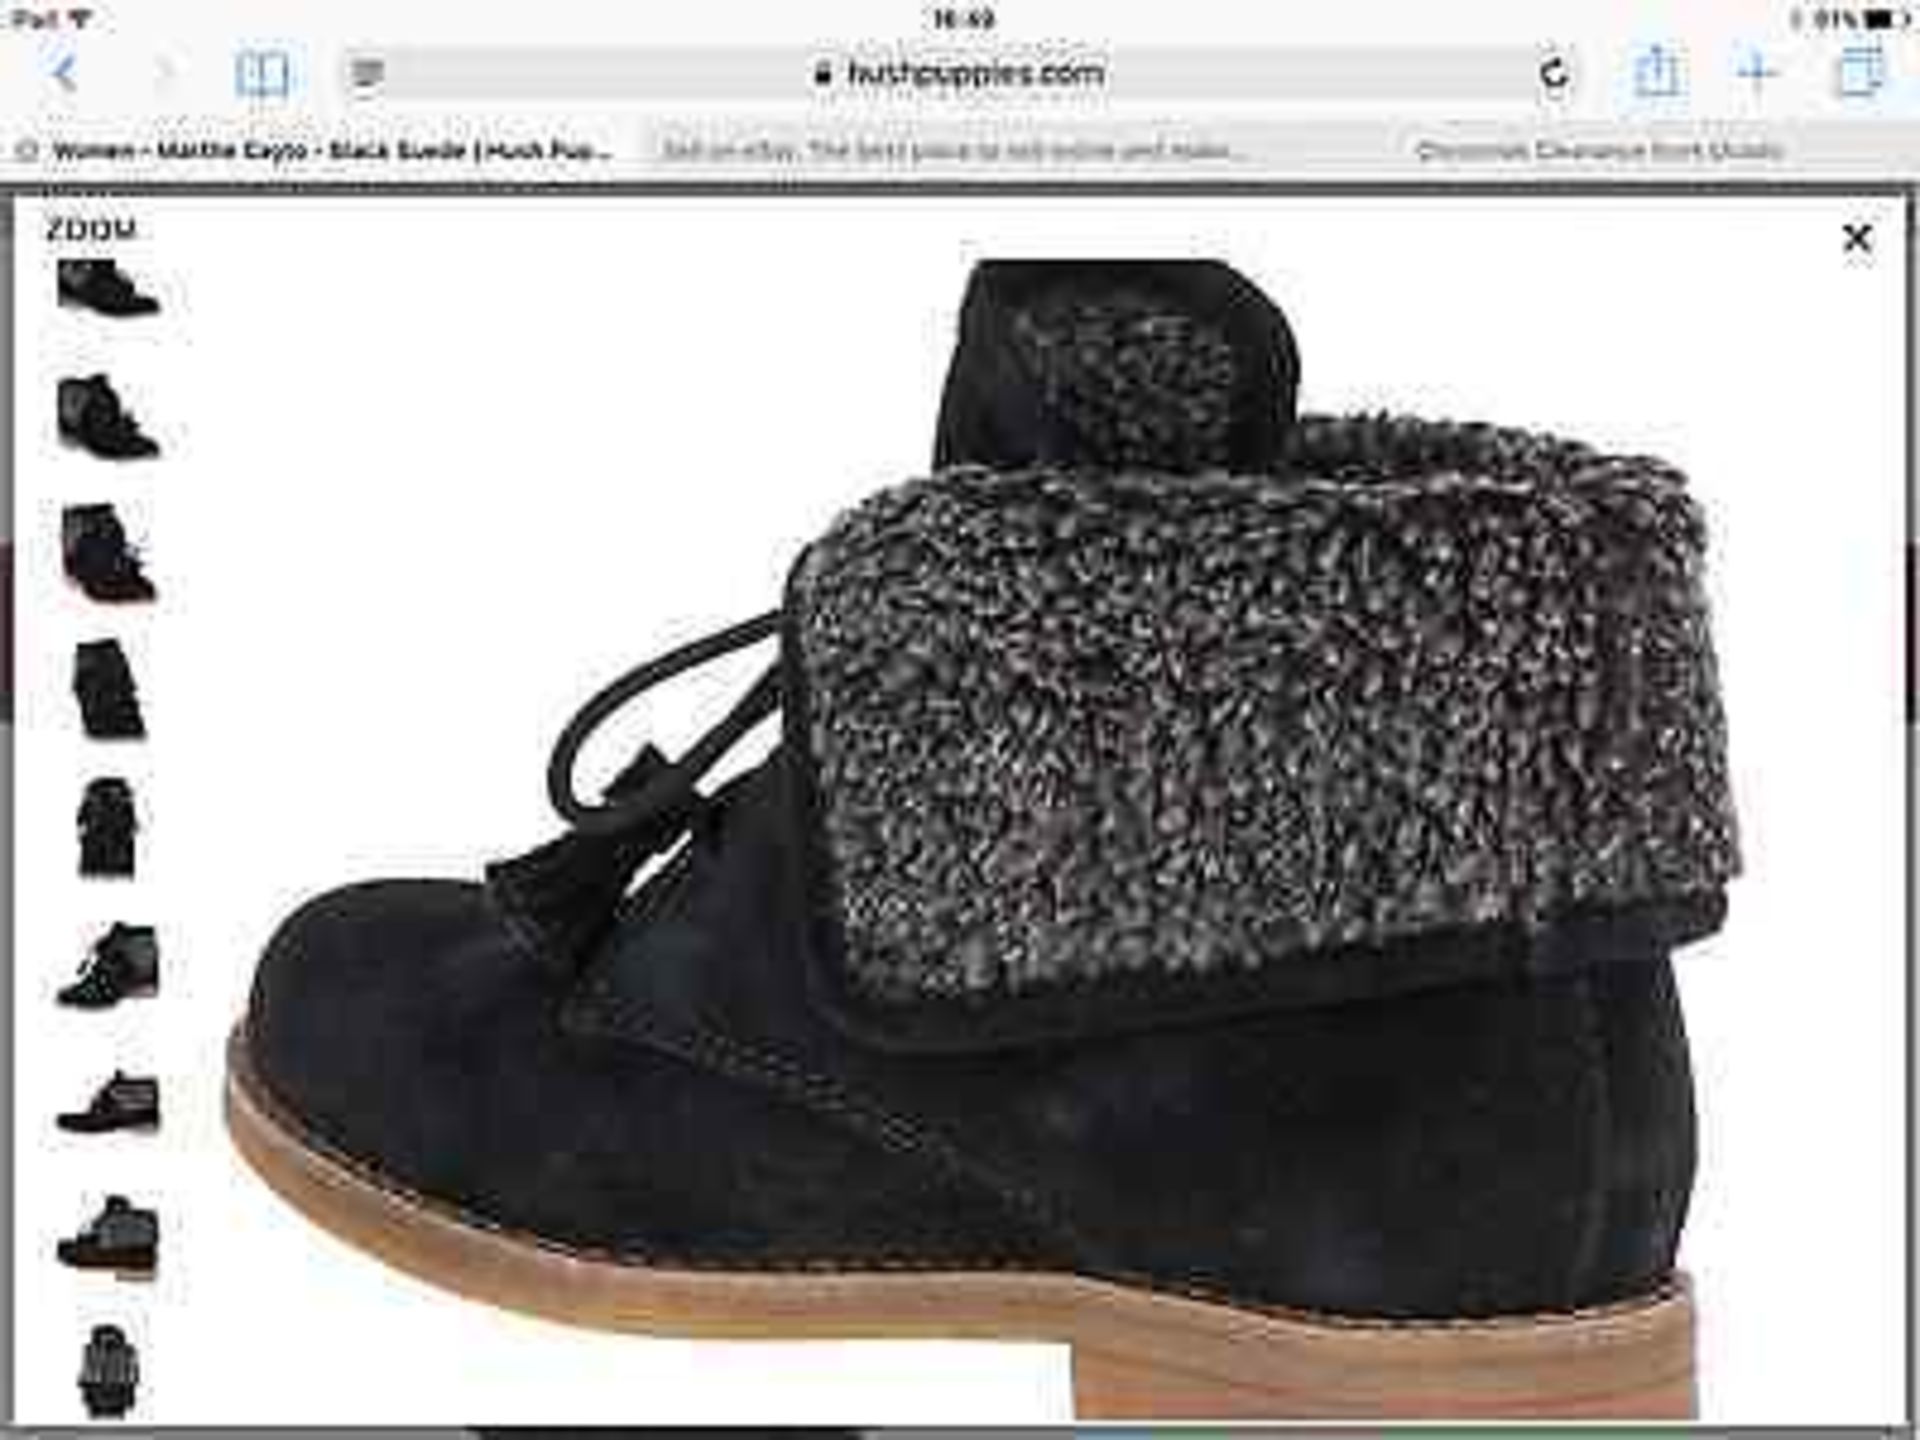 Hush Puppies Black Suede Martha Cayto Ankle Boot, Size UK 7, RRP £100 (New with box) [Ref: ] - Image 9 of 12